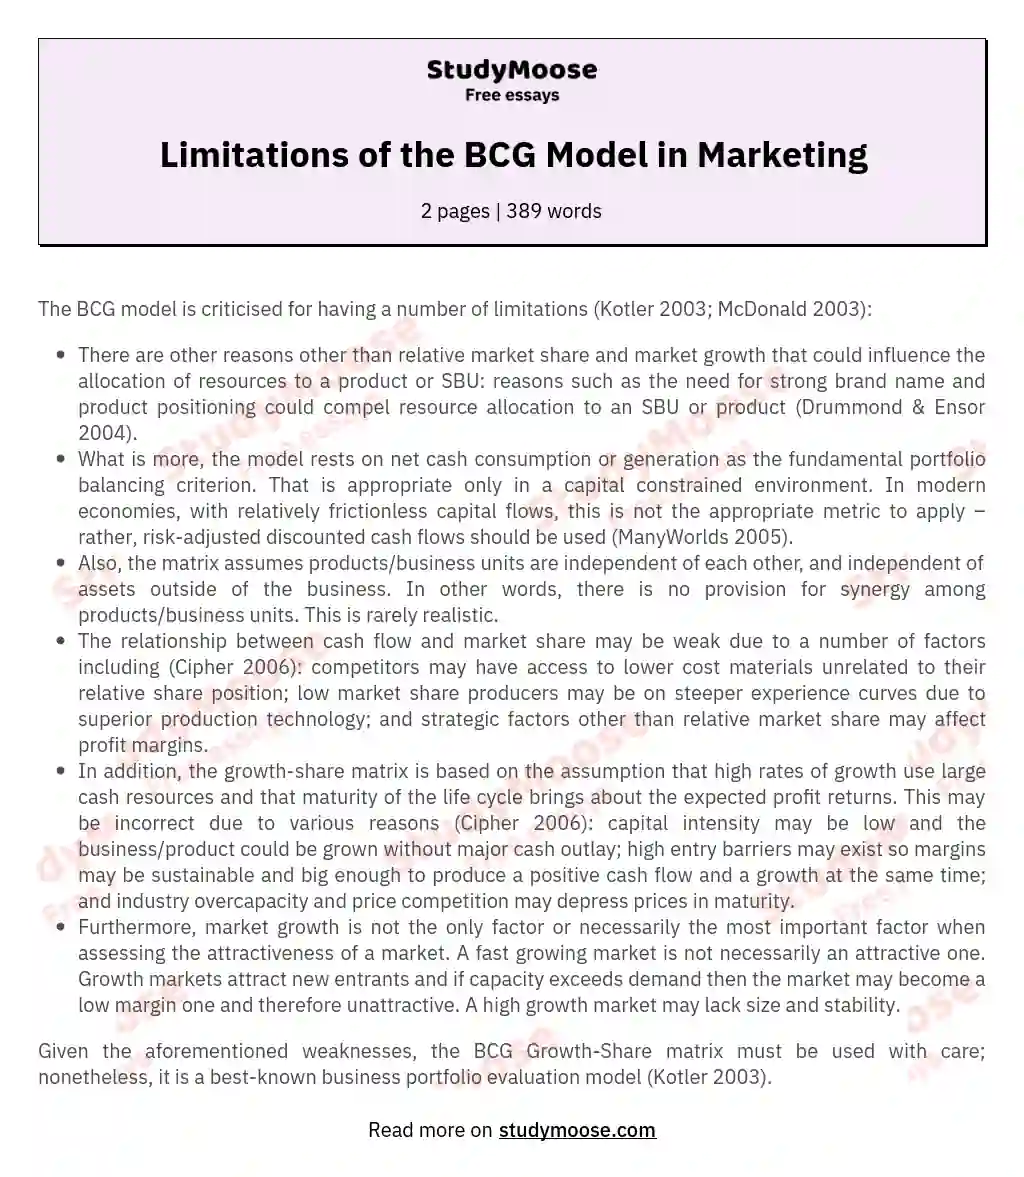 Limitations of the BCG Model in Marketing essay